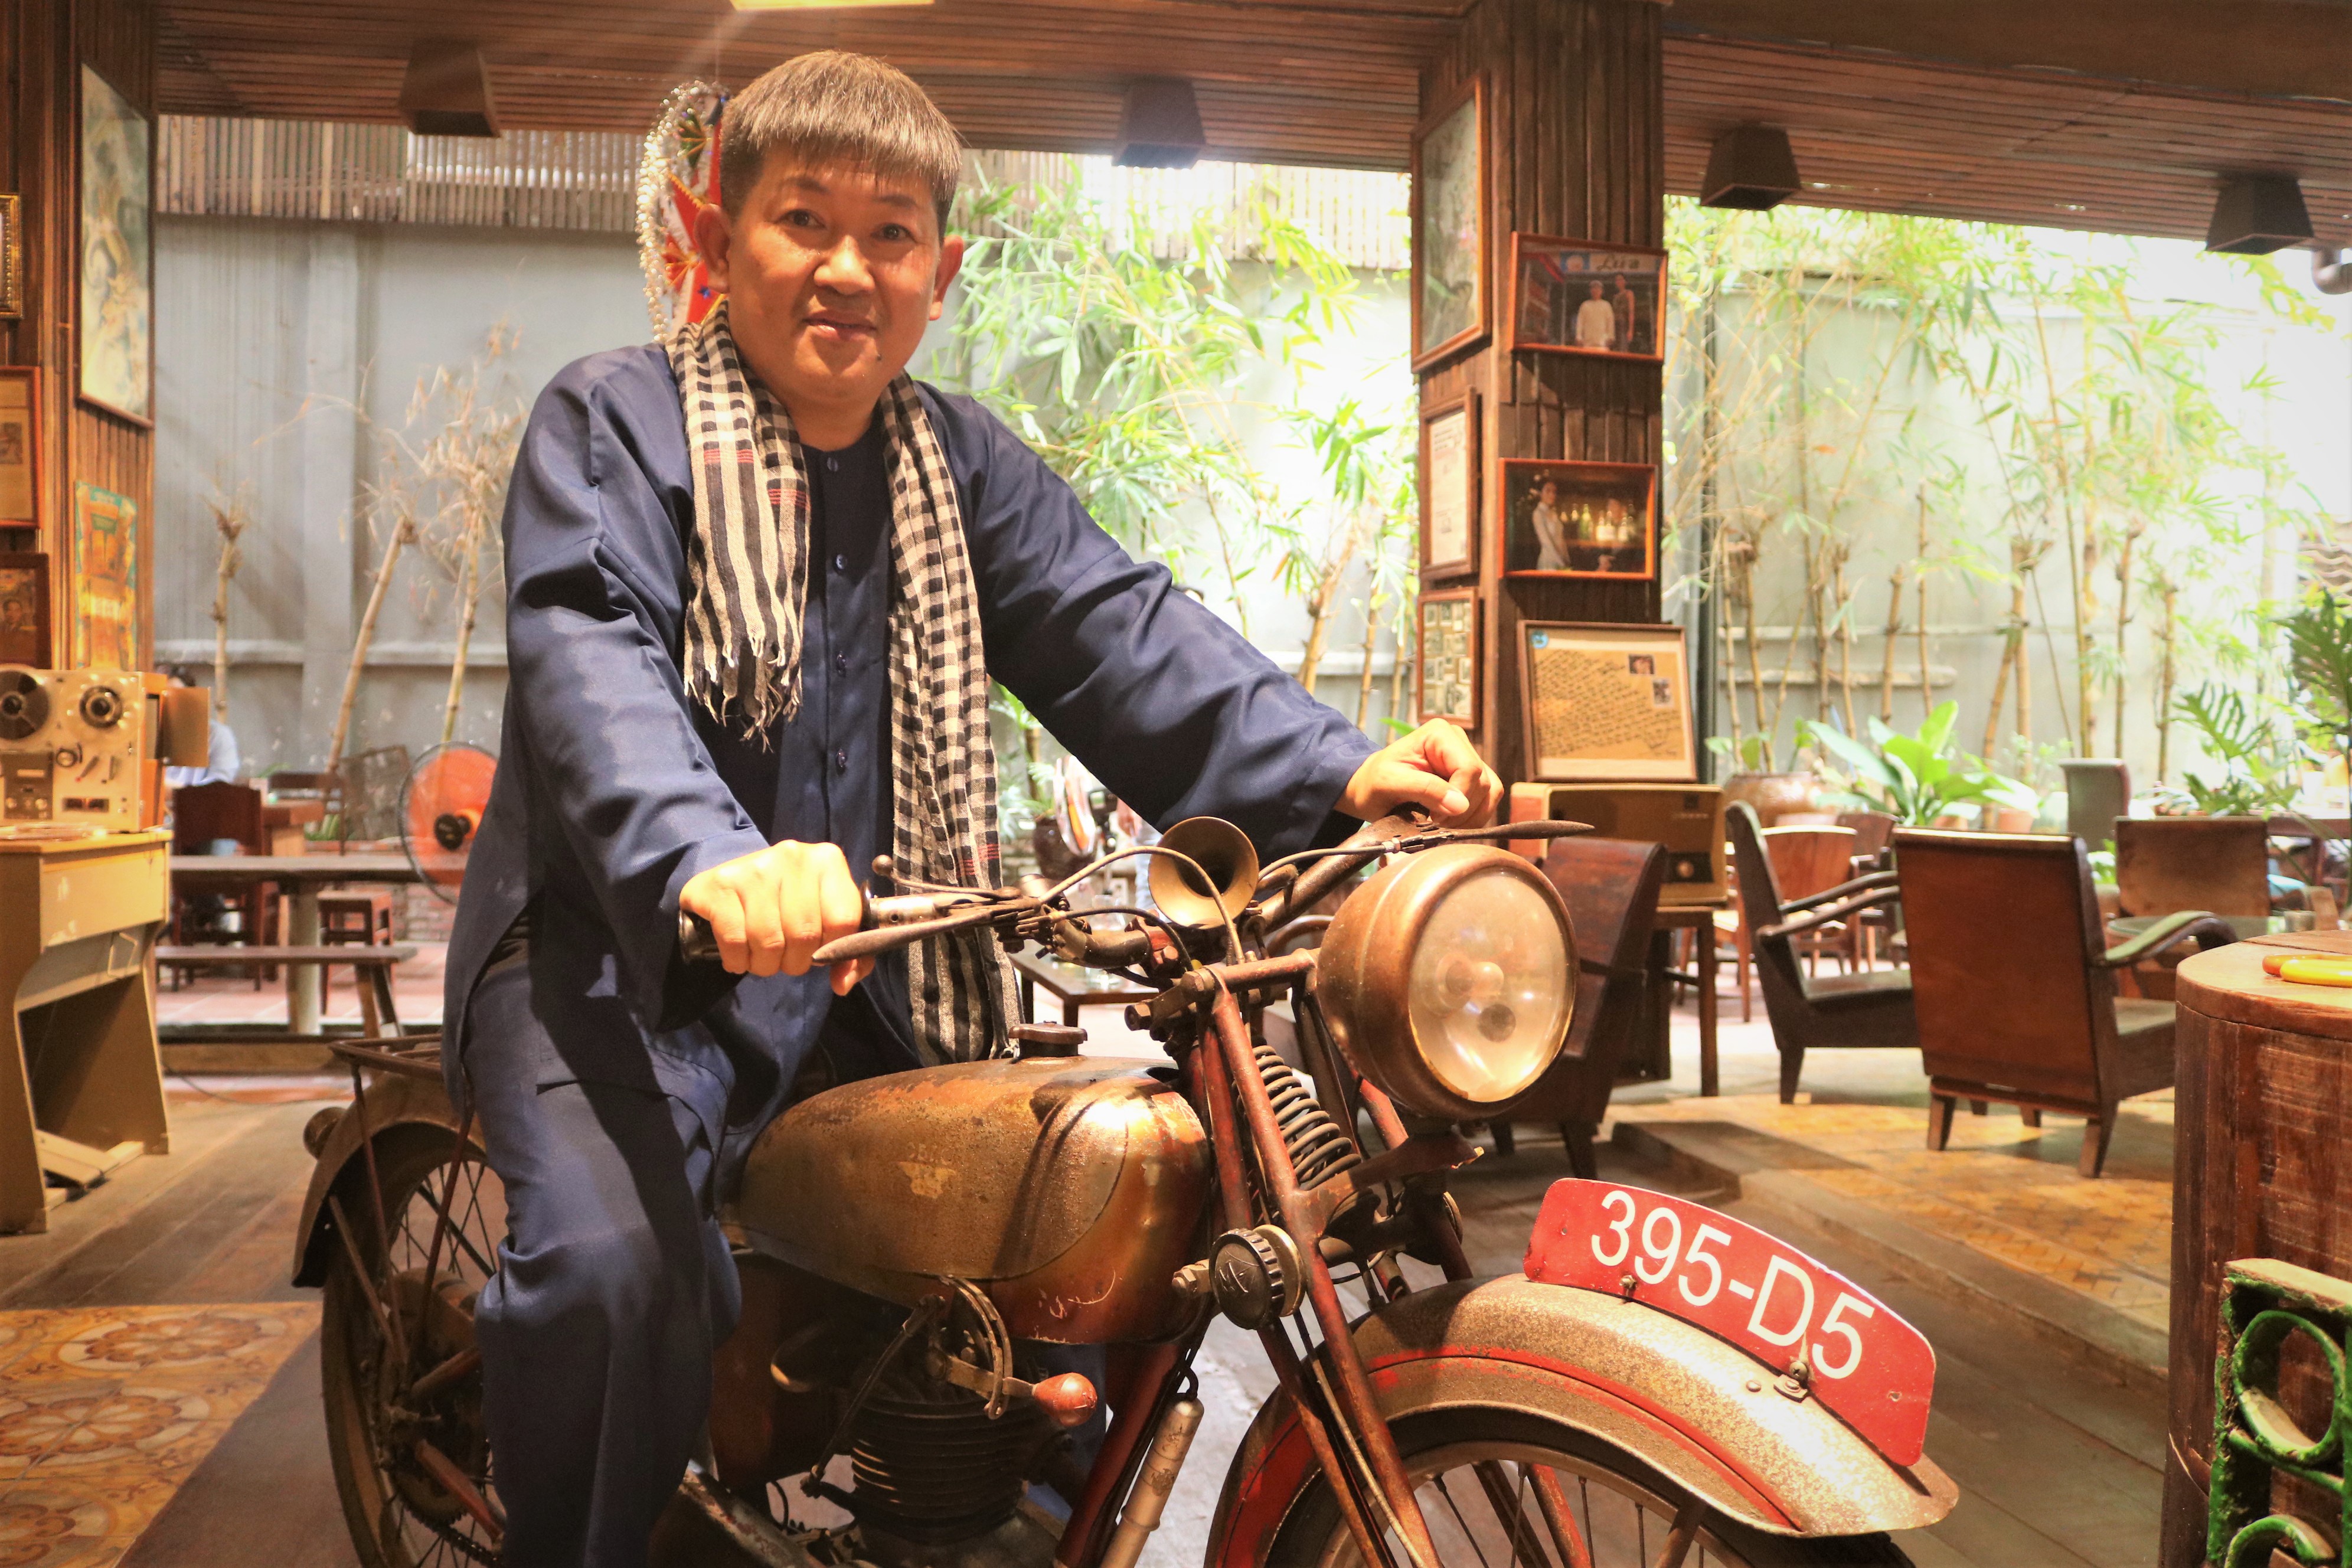 Huynh Minh Hiep, the owner of Lua Saigon café, poses with his 1938 Motobecane AB1 at Lua Sai Gon café in Phu Nhuan District, Ho Chi Minh City. Photo: Hoang An / Tuoi Tre News